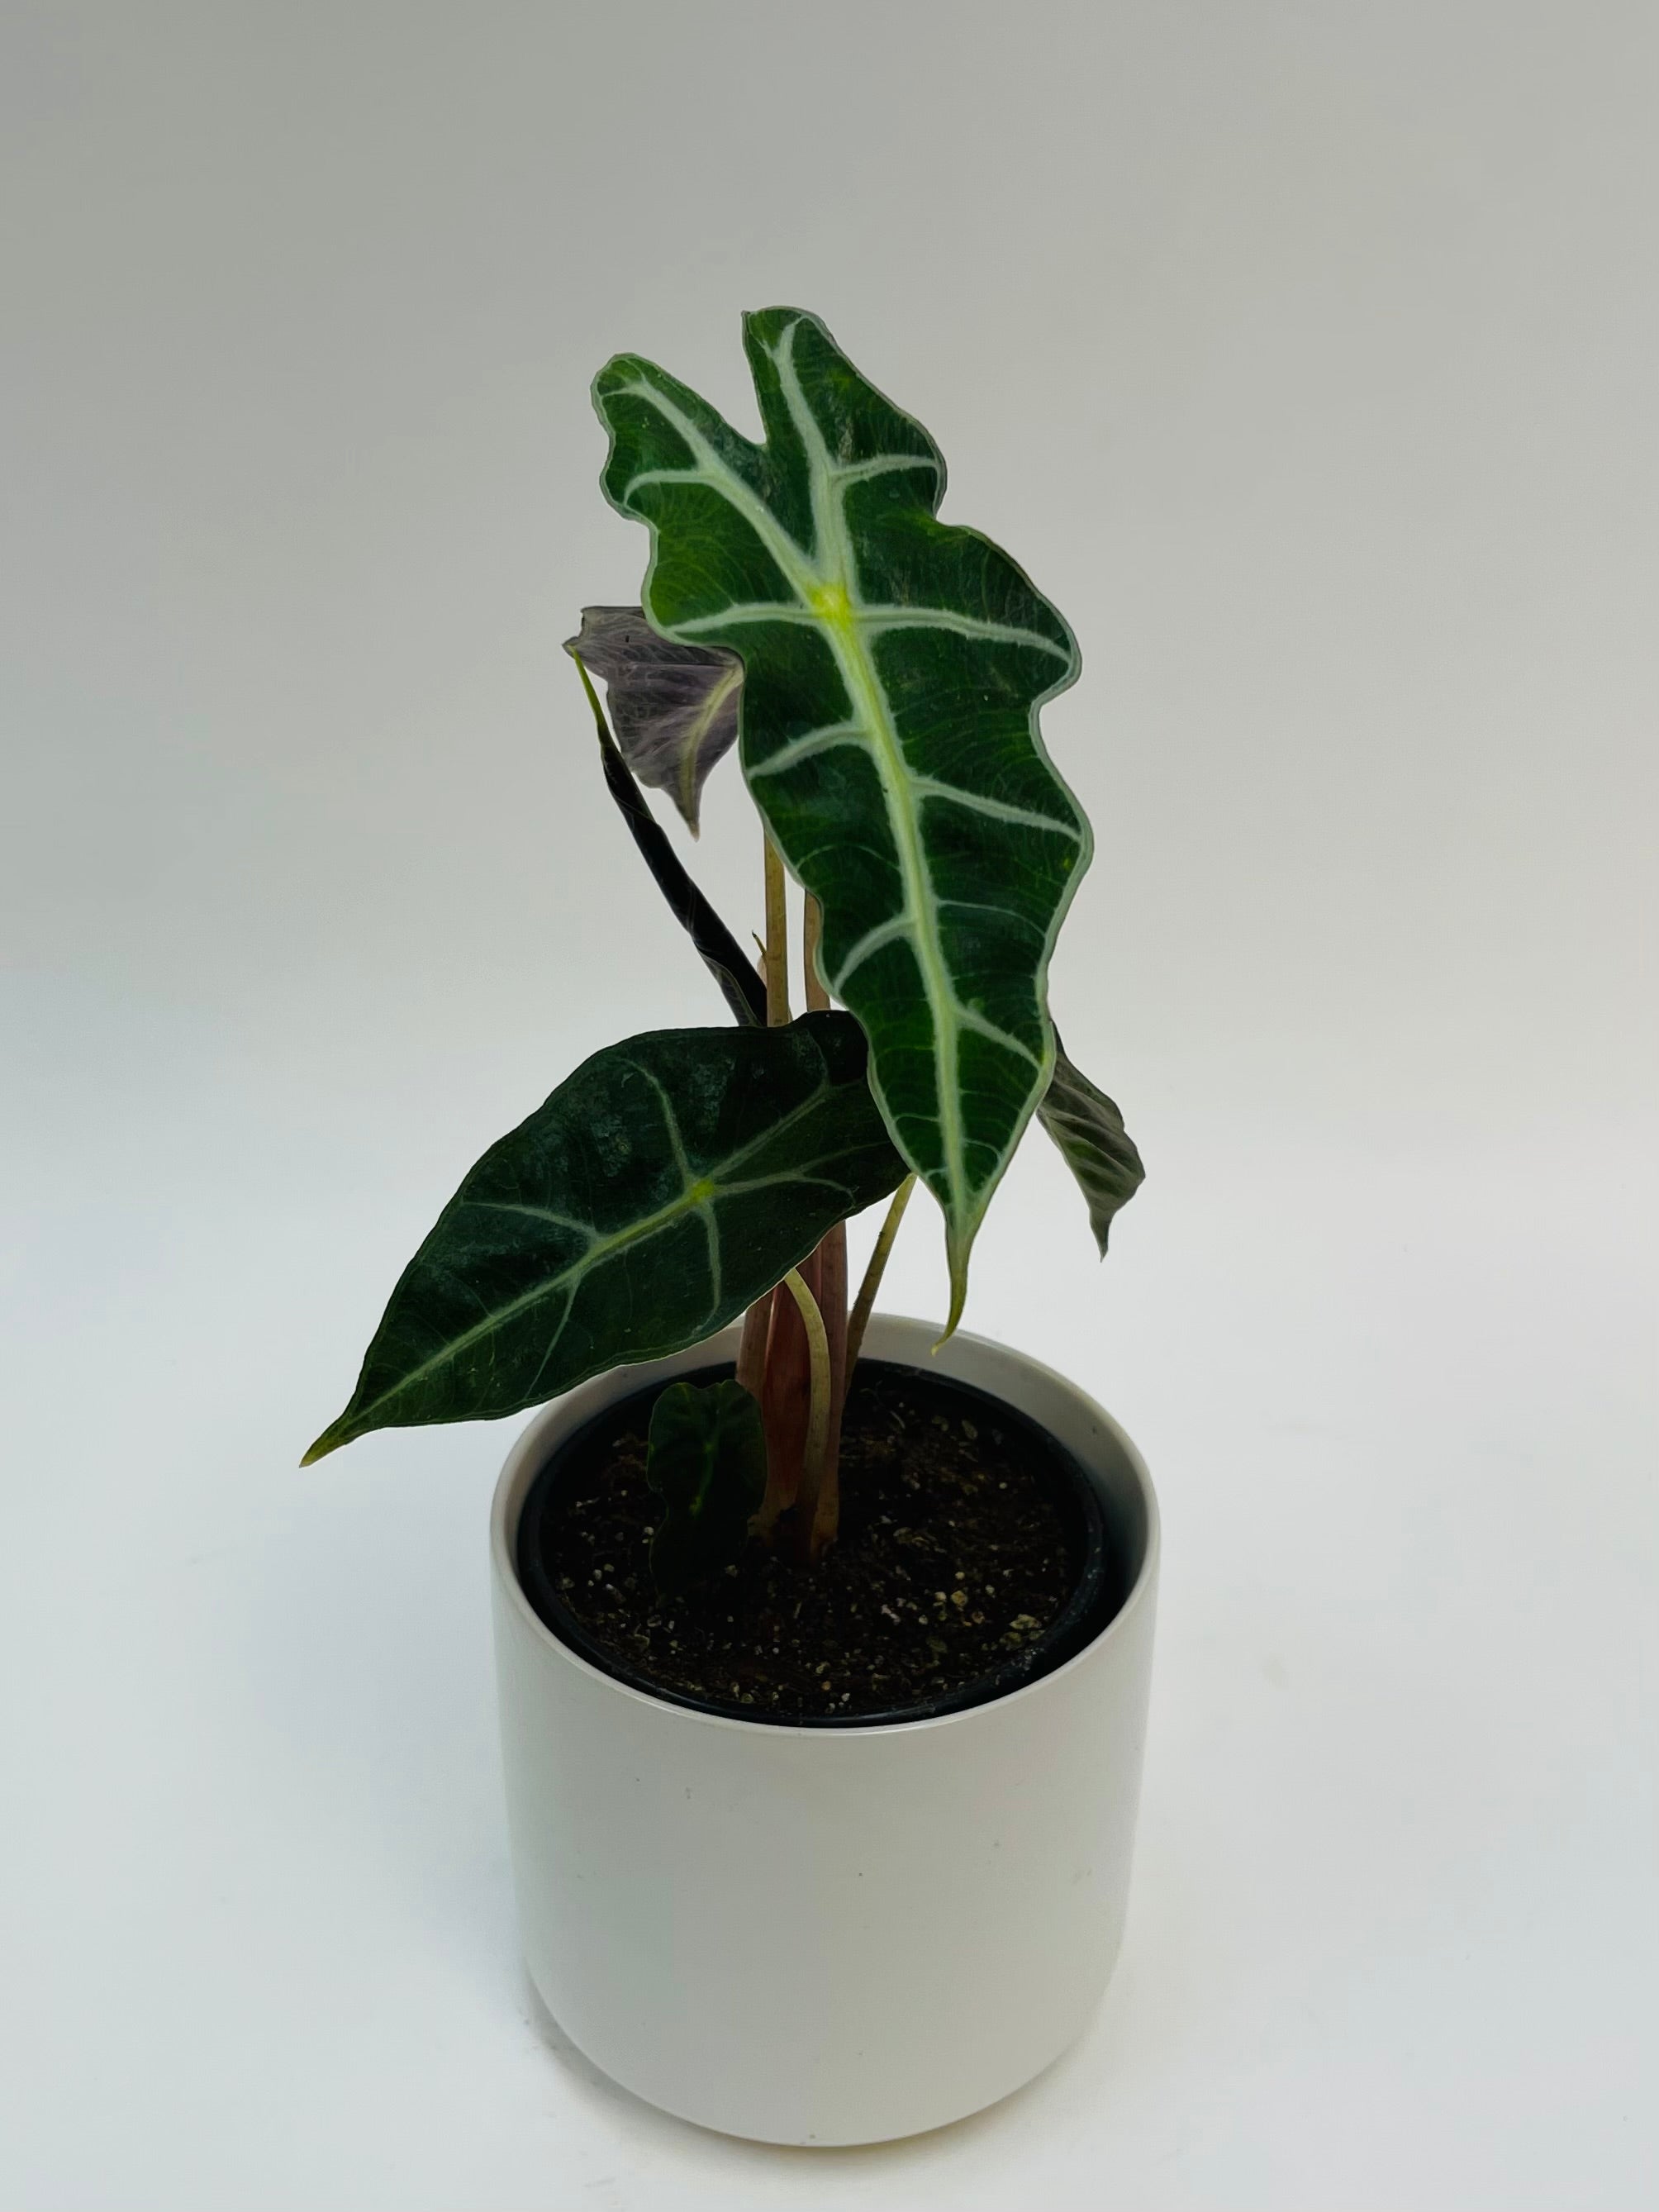 Alocasia African Mask 4"